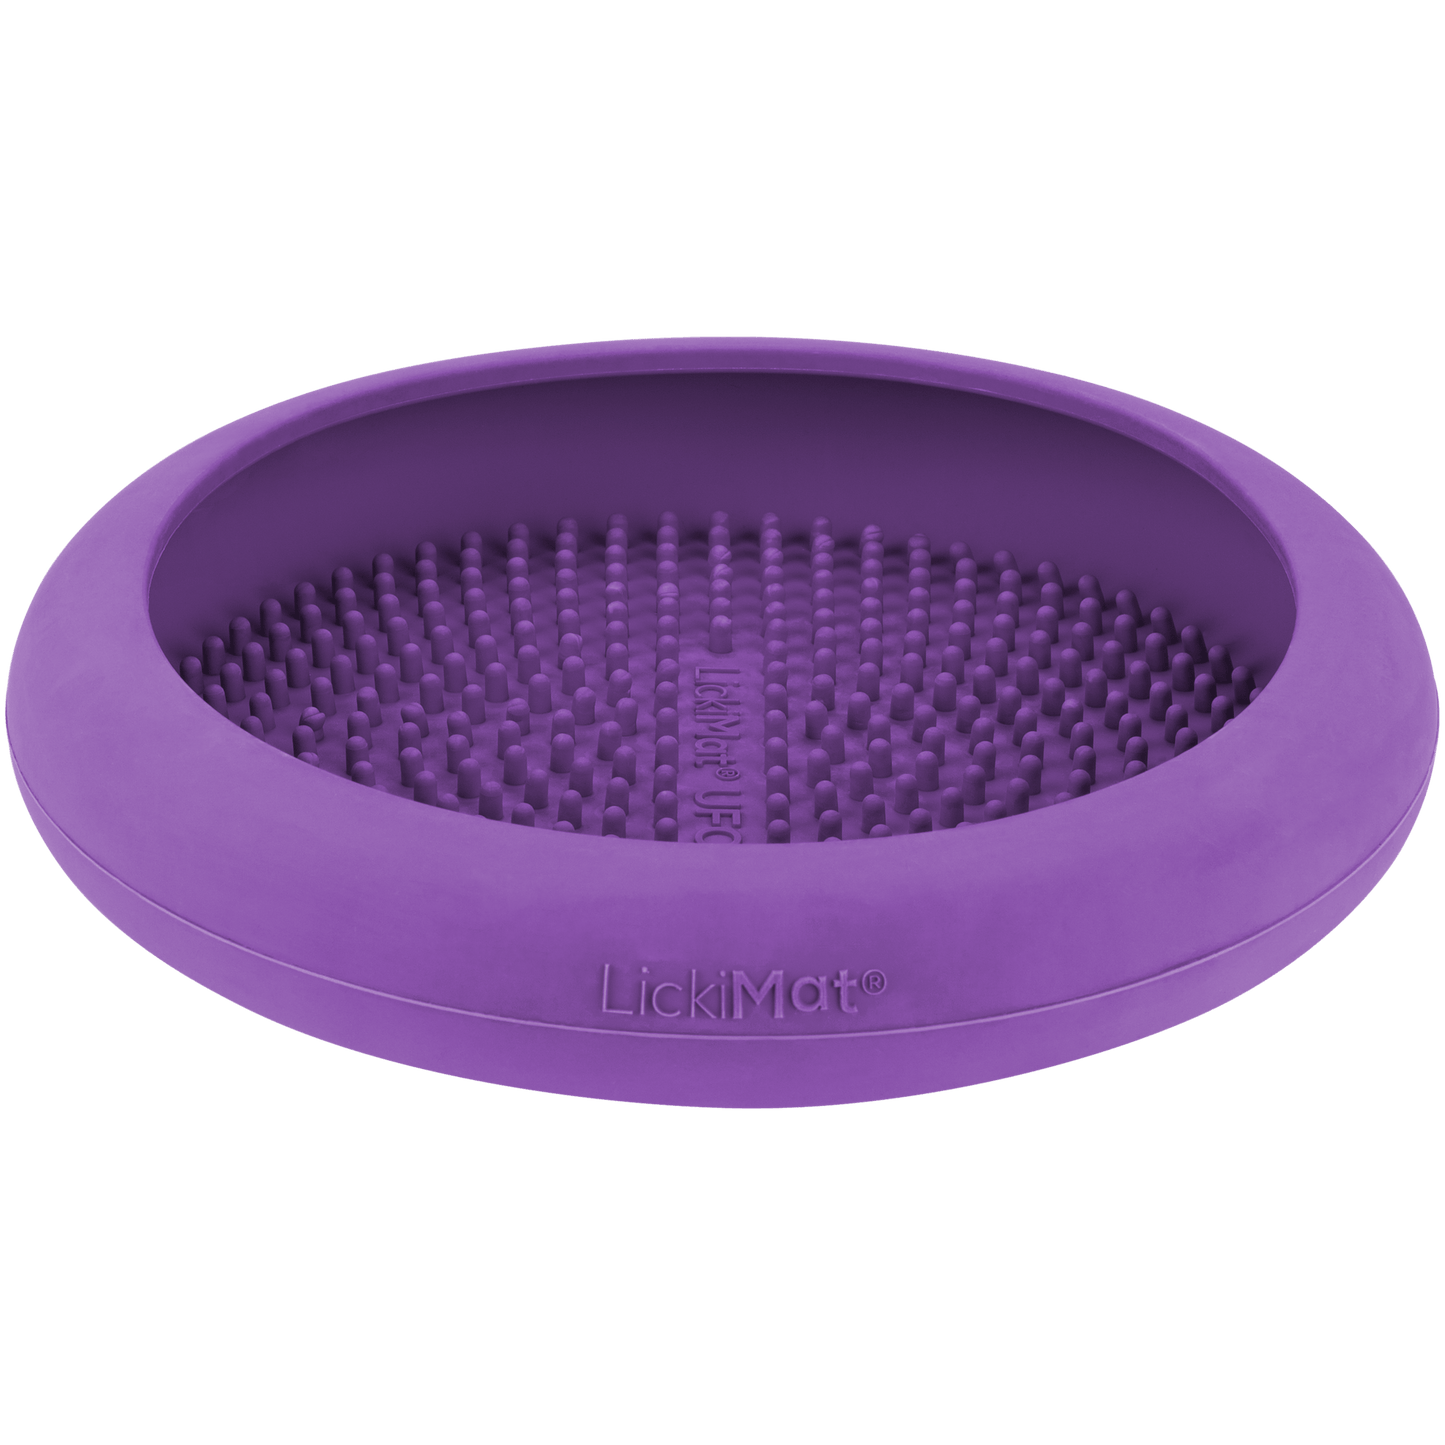 A purple rubber bowl with numbs inside.